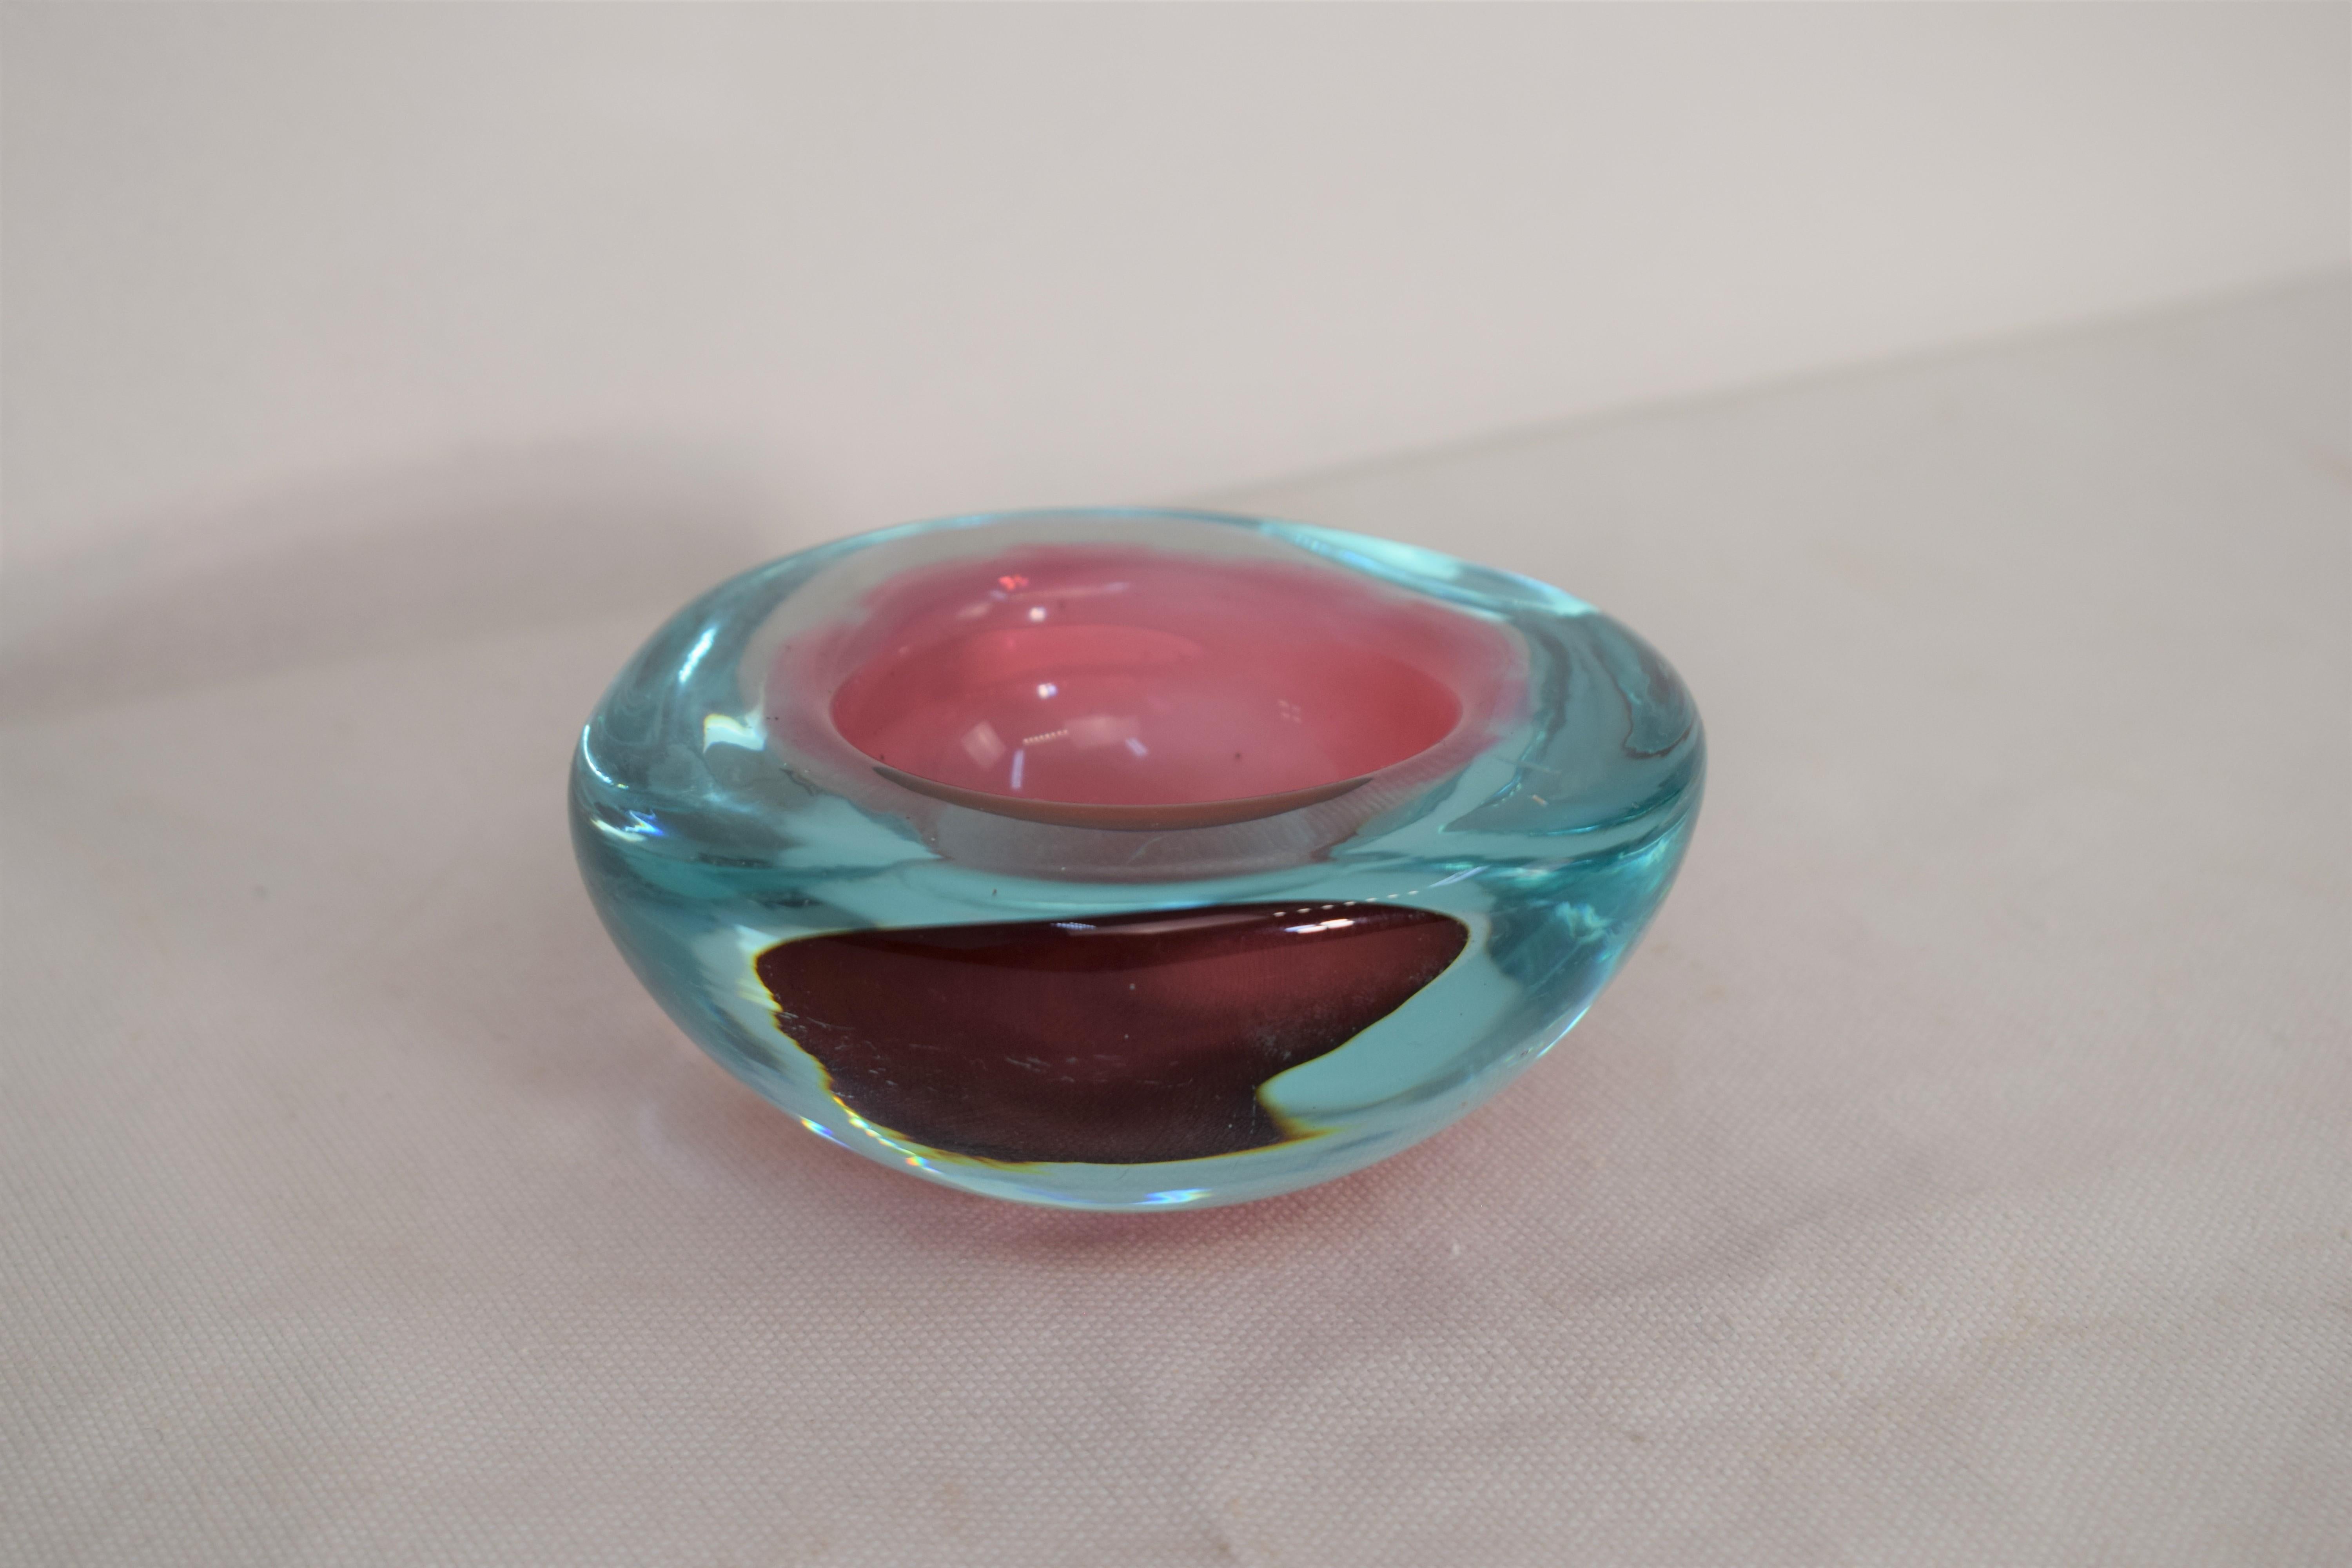 Italian glass bowl from Murano, 1960s.

Dimensions: H= 5 cm; D= 10 cm.